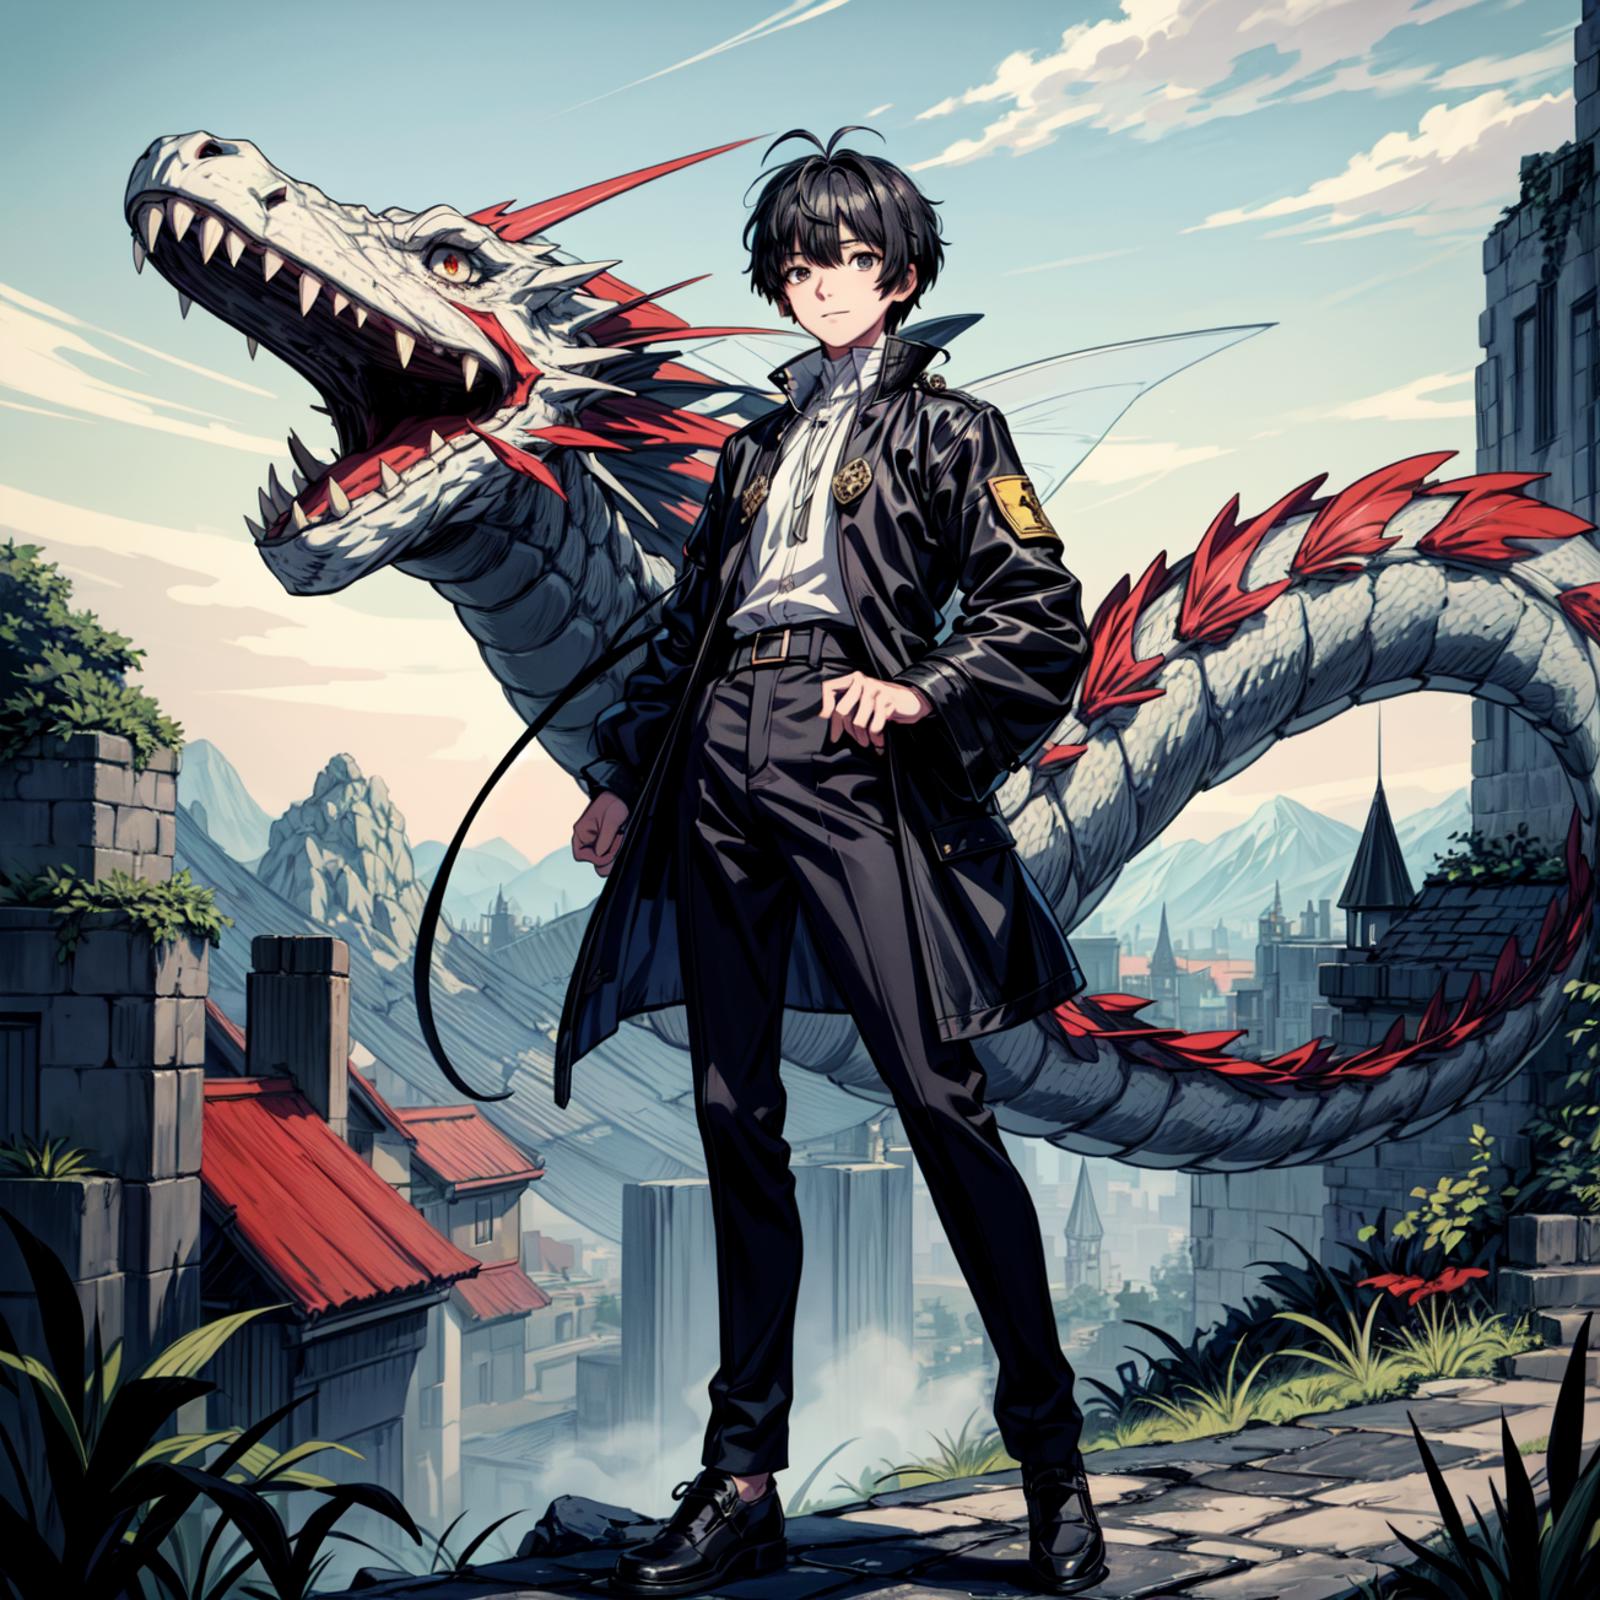 A young man standing next to a dragon in a fantasy world.